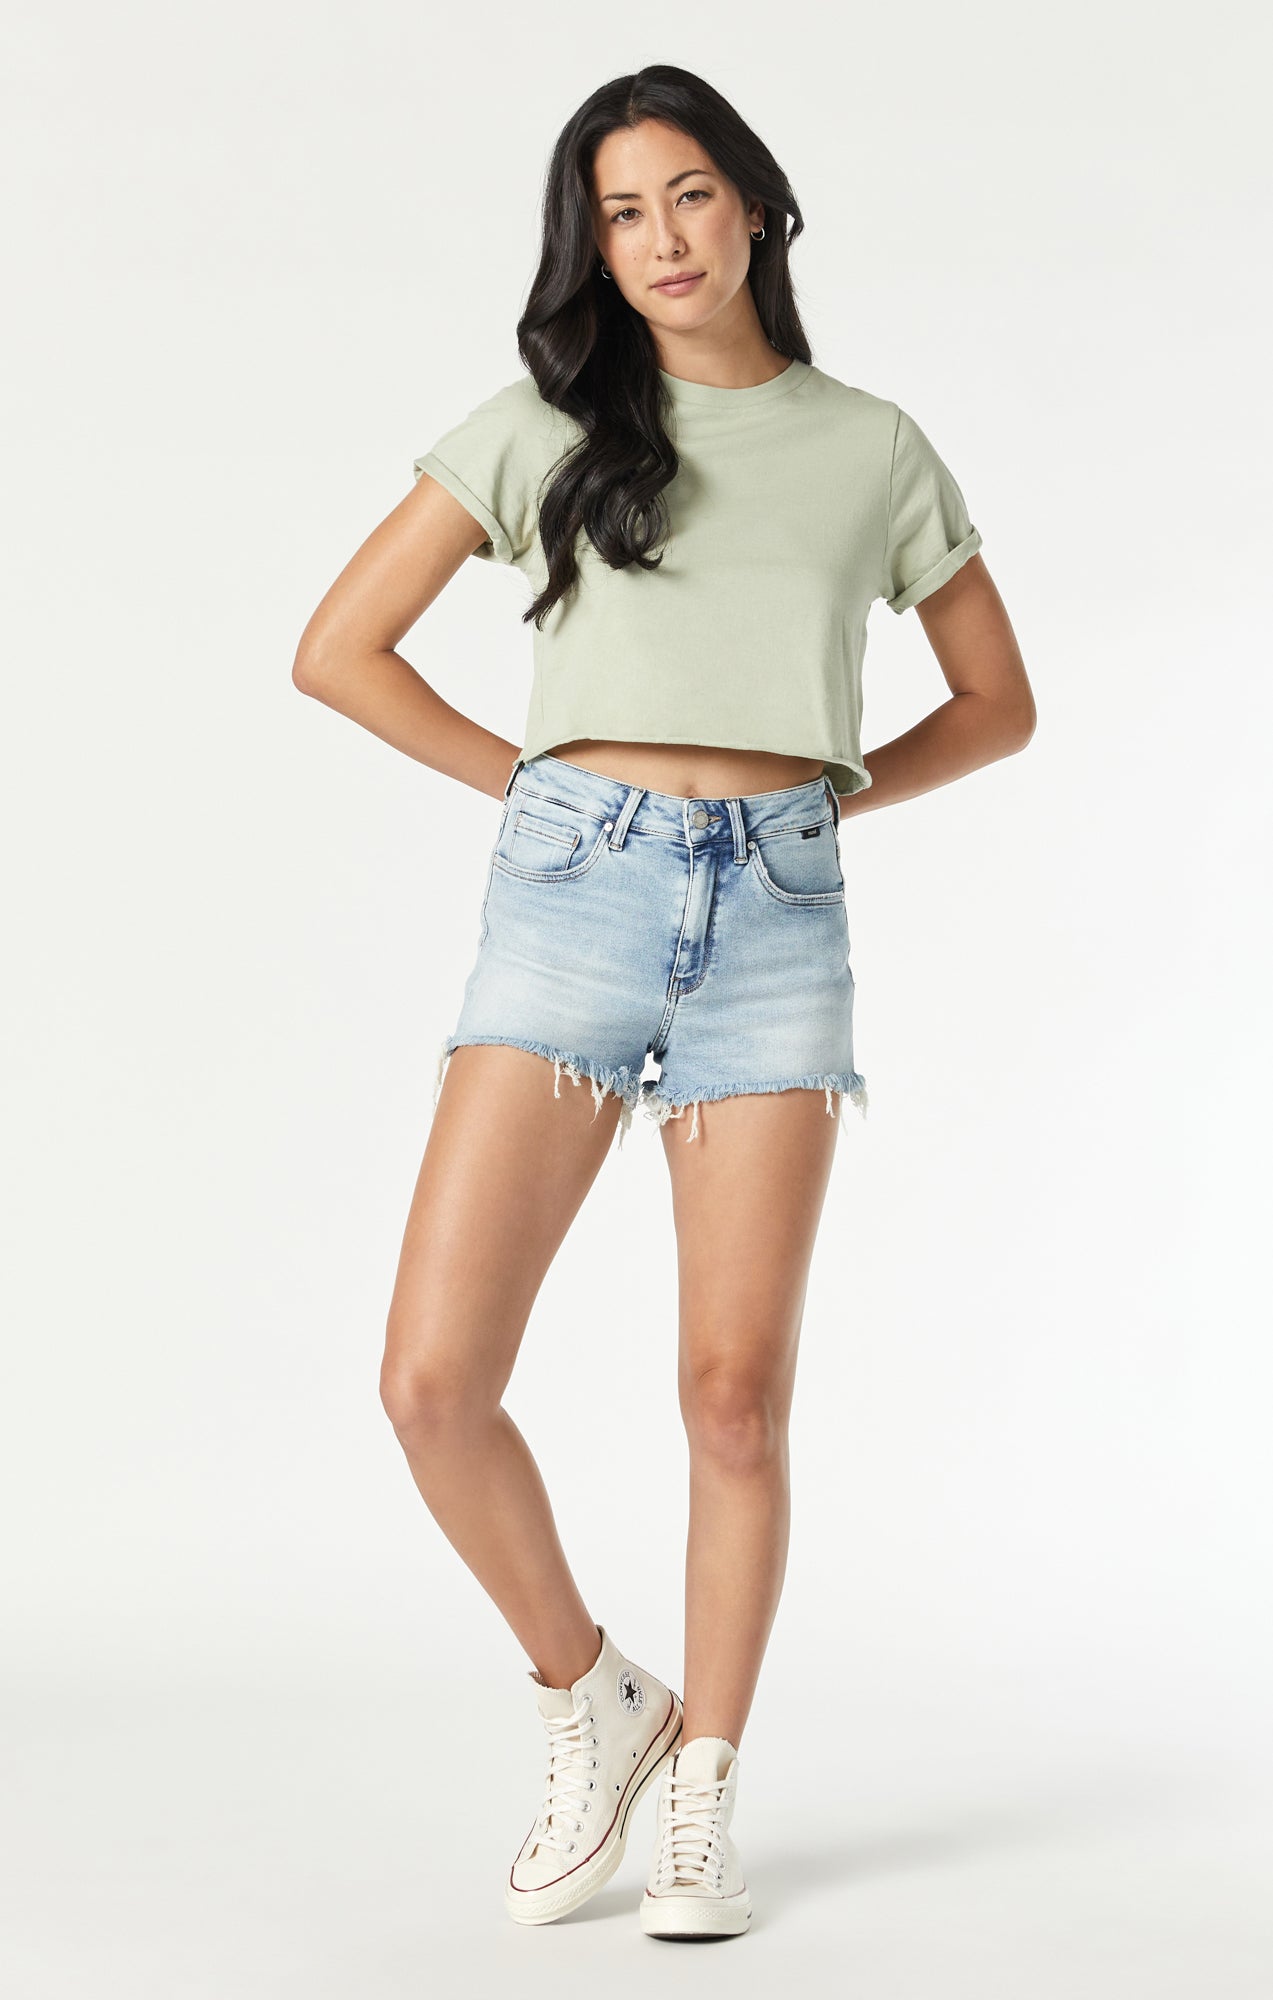 Ell & Voo Womens Judy Shorts Blue S, Price History & Comparison